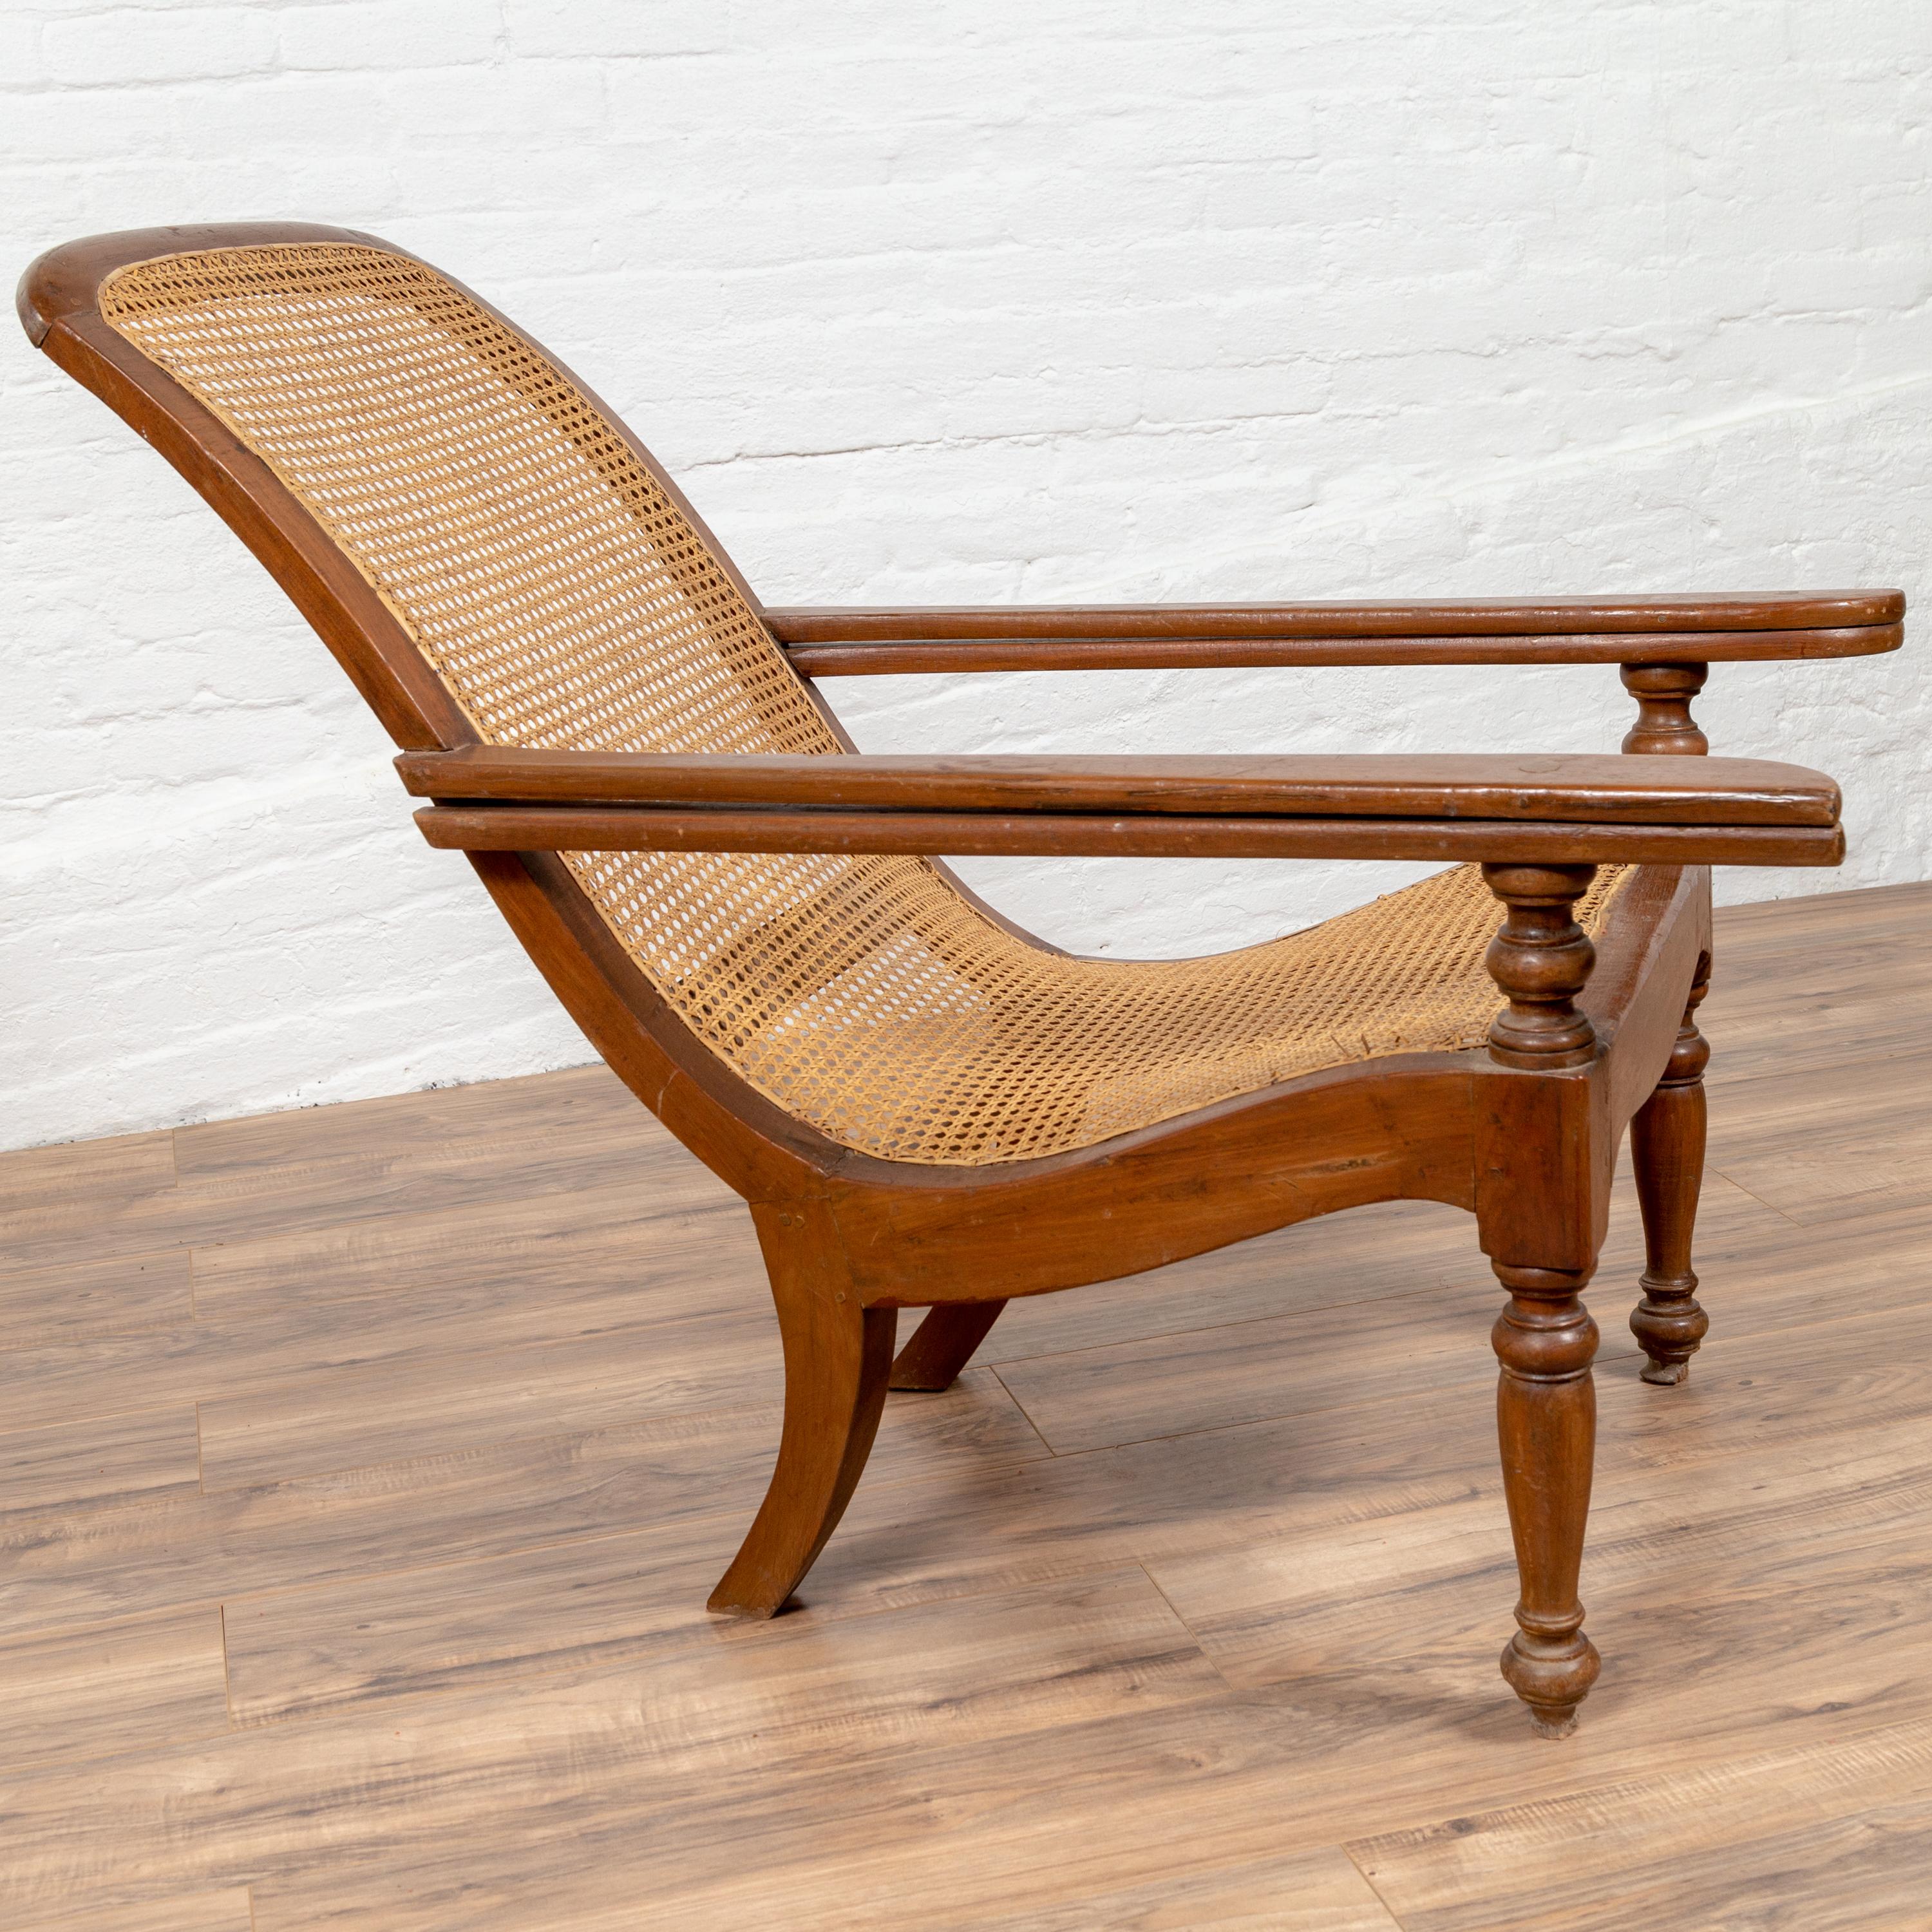 An antique Dutch Colonial Indonesian plantation lounge chair from the early 20th century, with rattan seat and extending arms. Designed to provide a relaxing experience to the sitter, this Dutch Colonial lounge chair features a nicely curving body